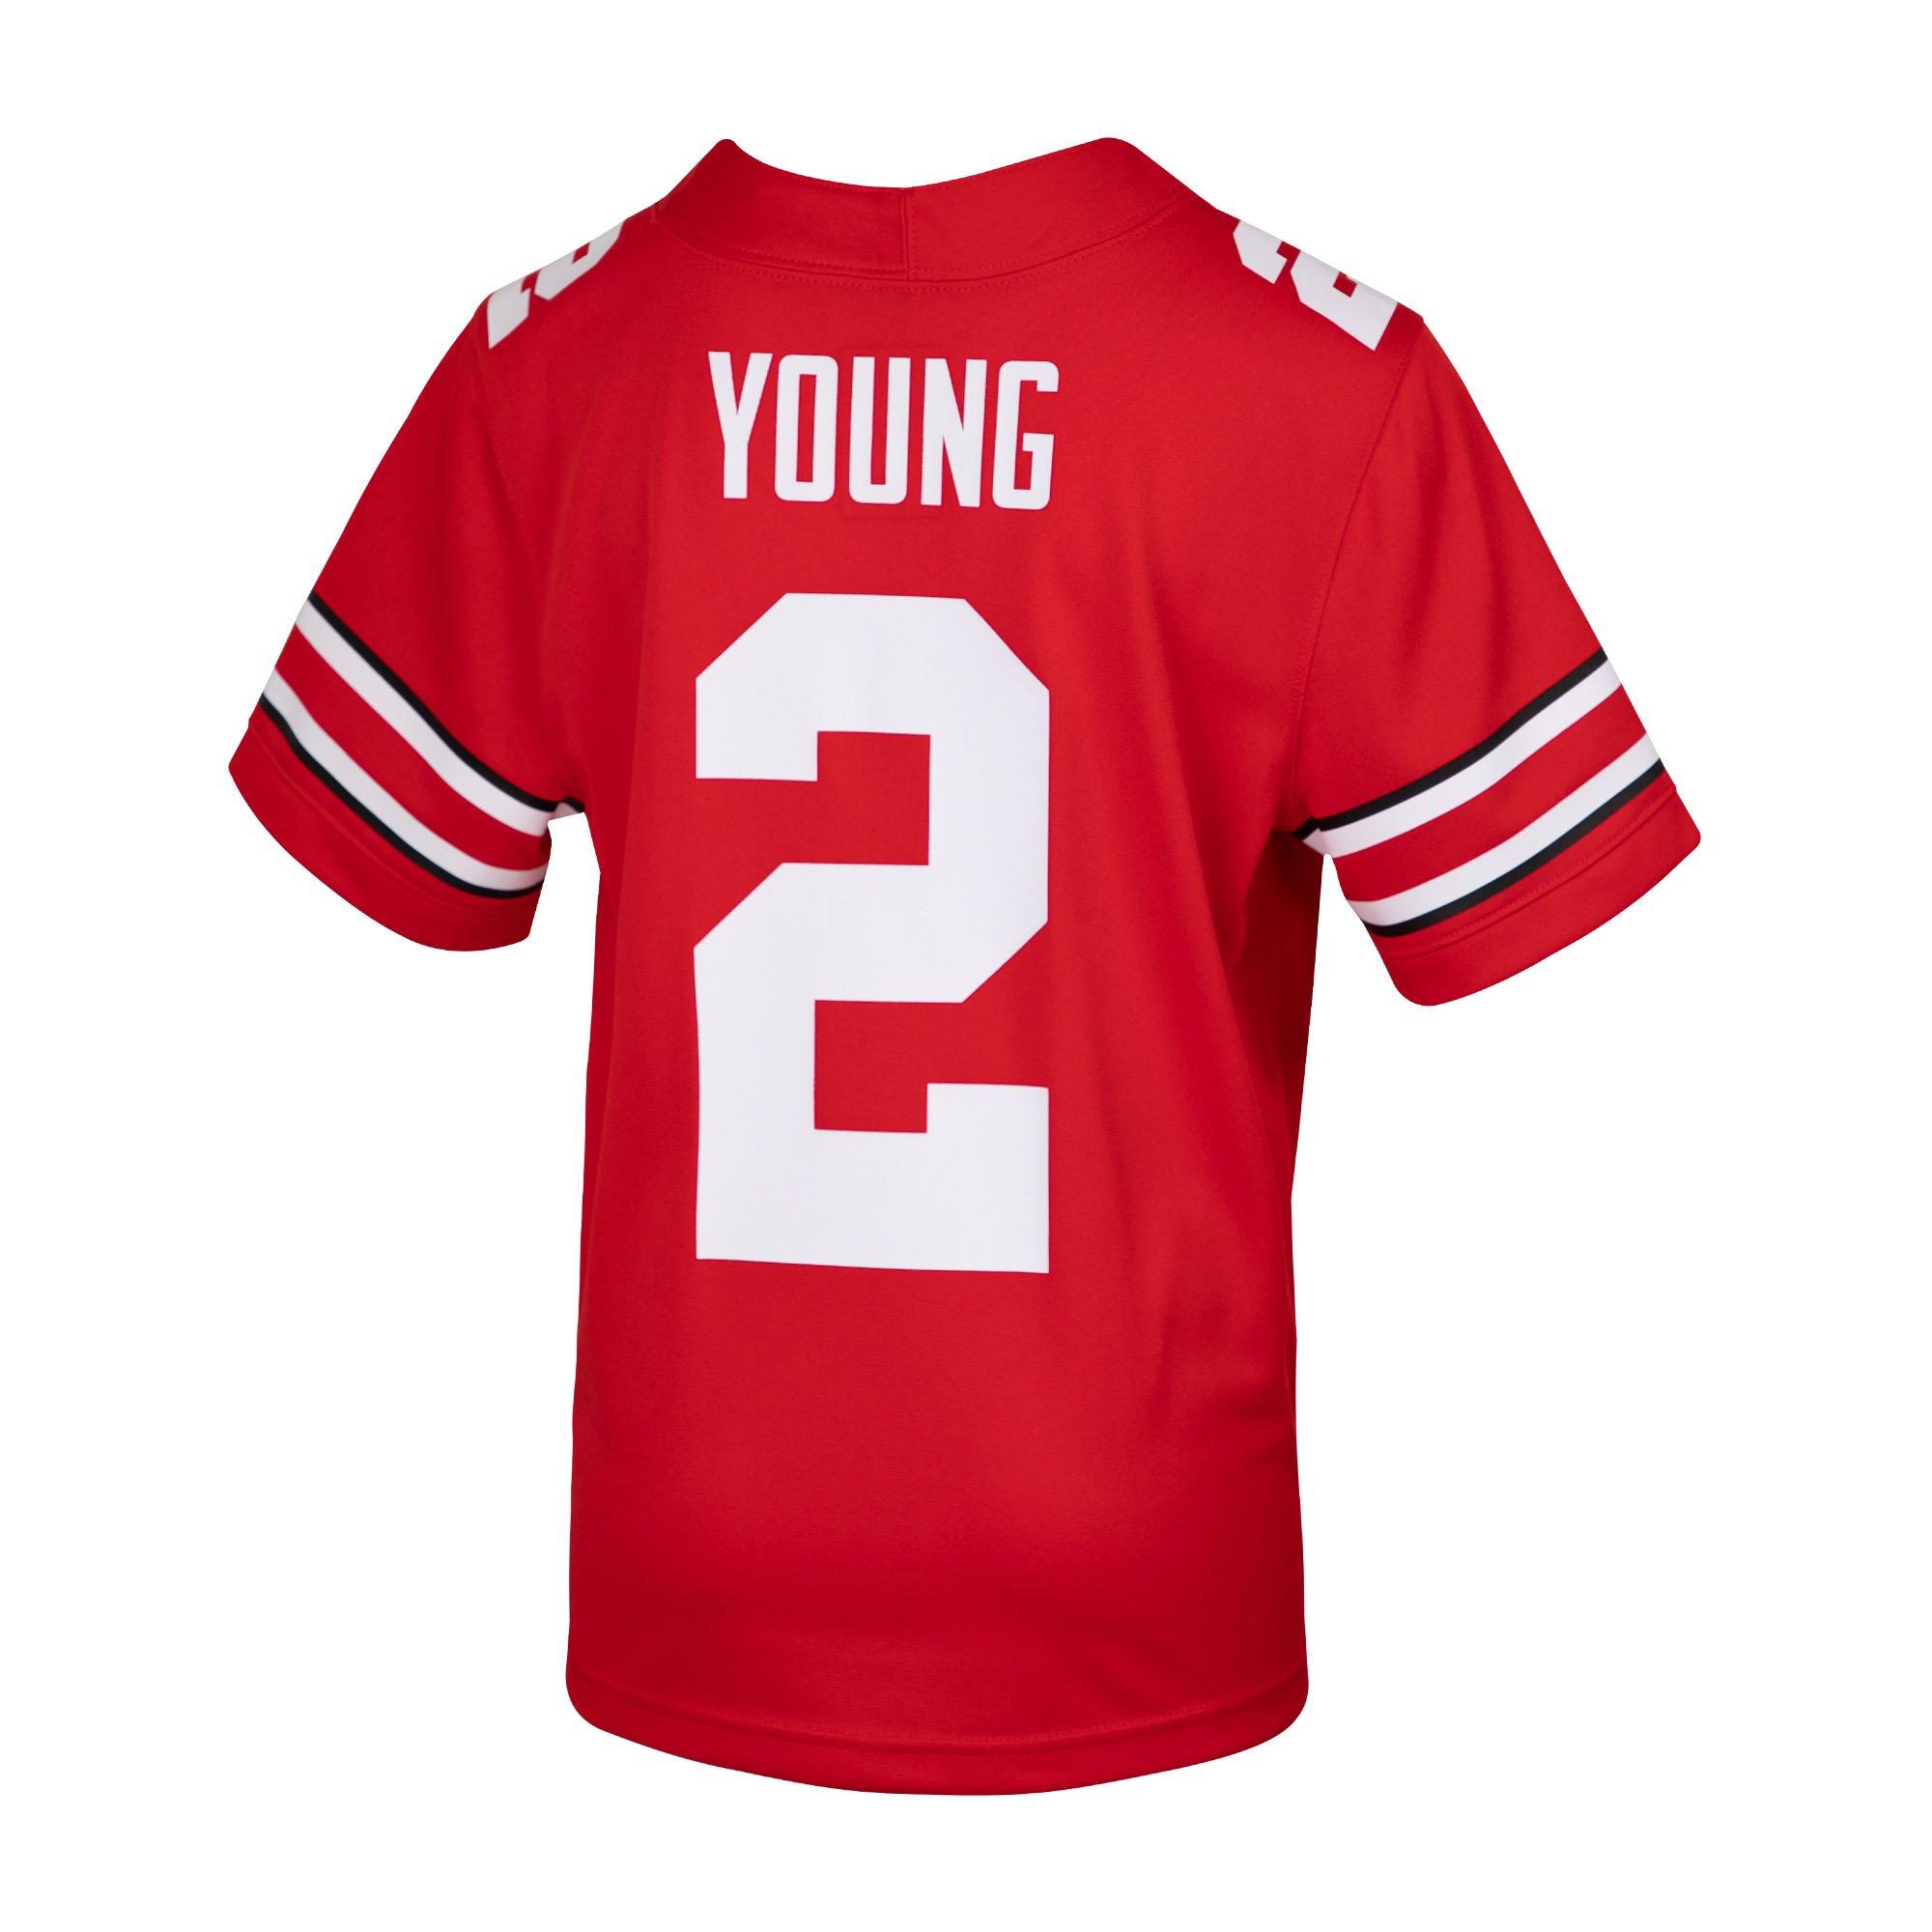 chase young osu jersey